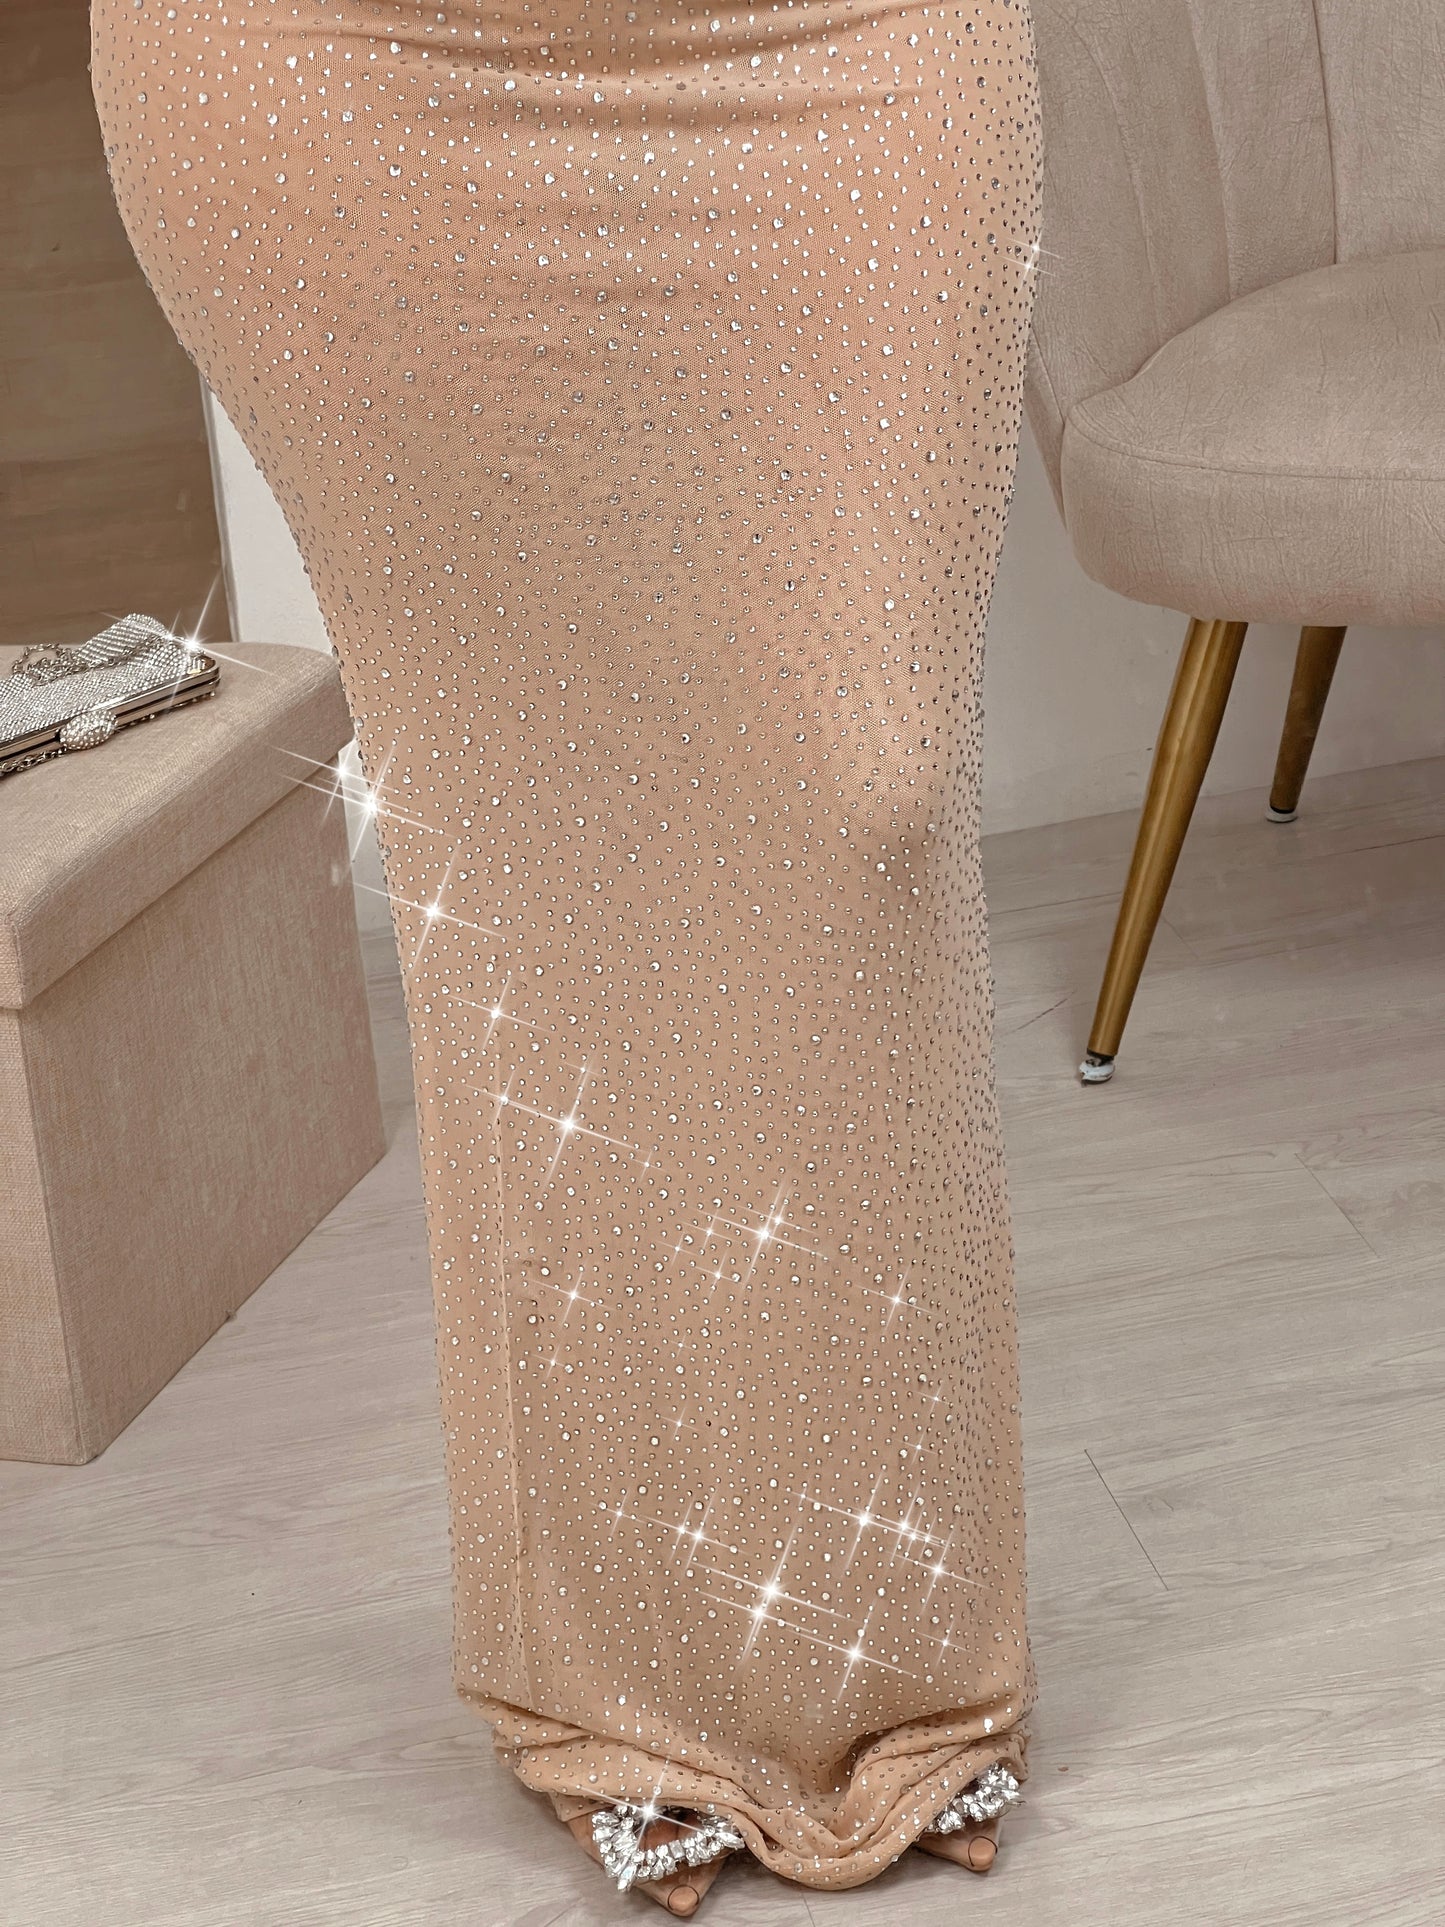 Marlyn Marnie Replicated Embellished Nude Gown